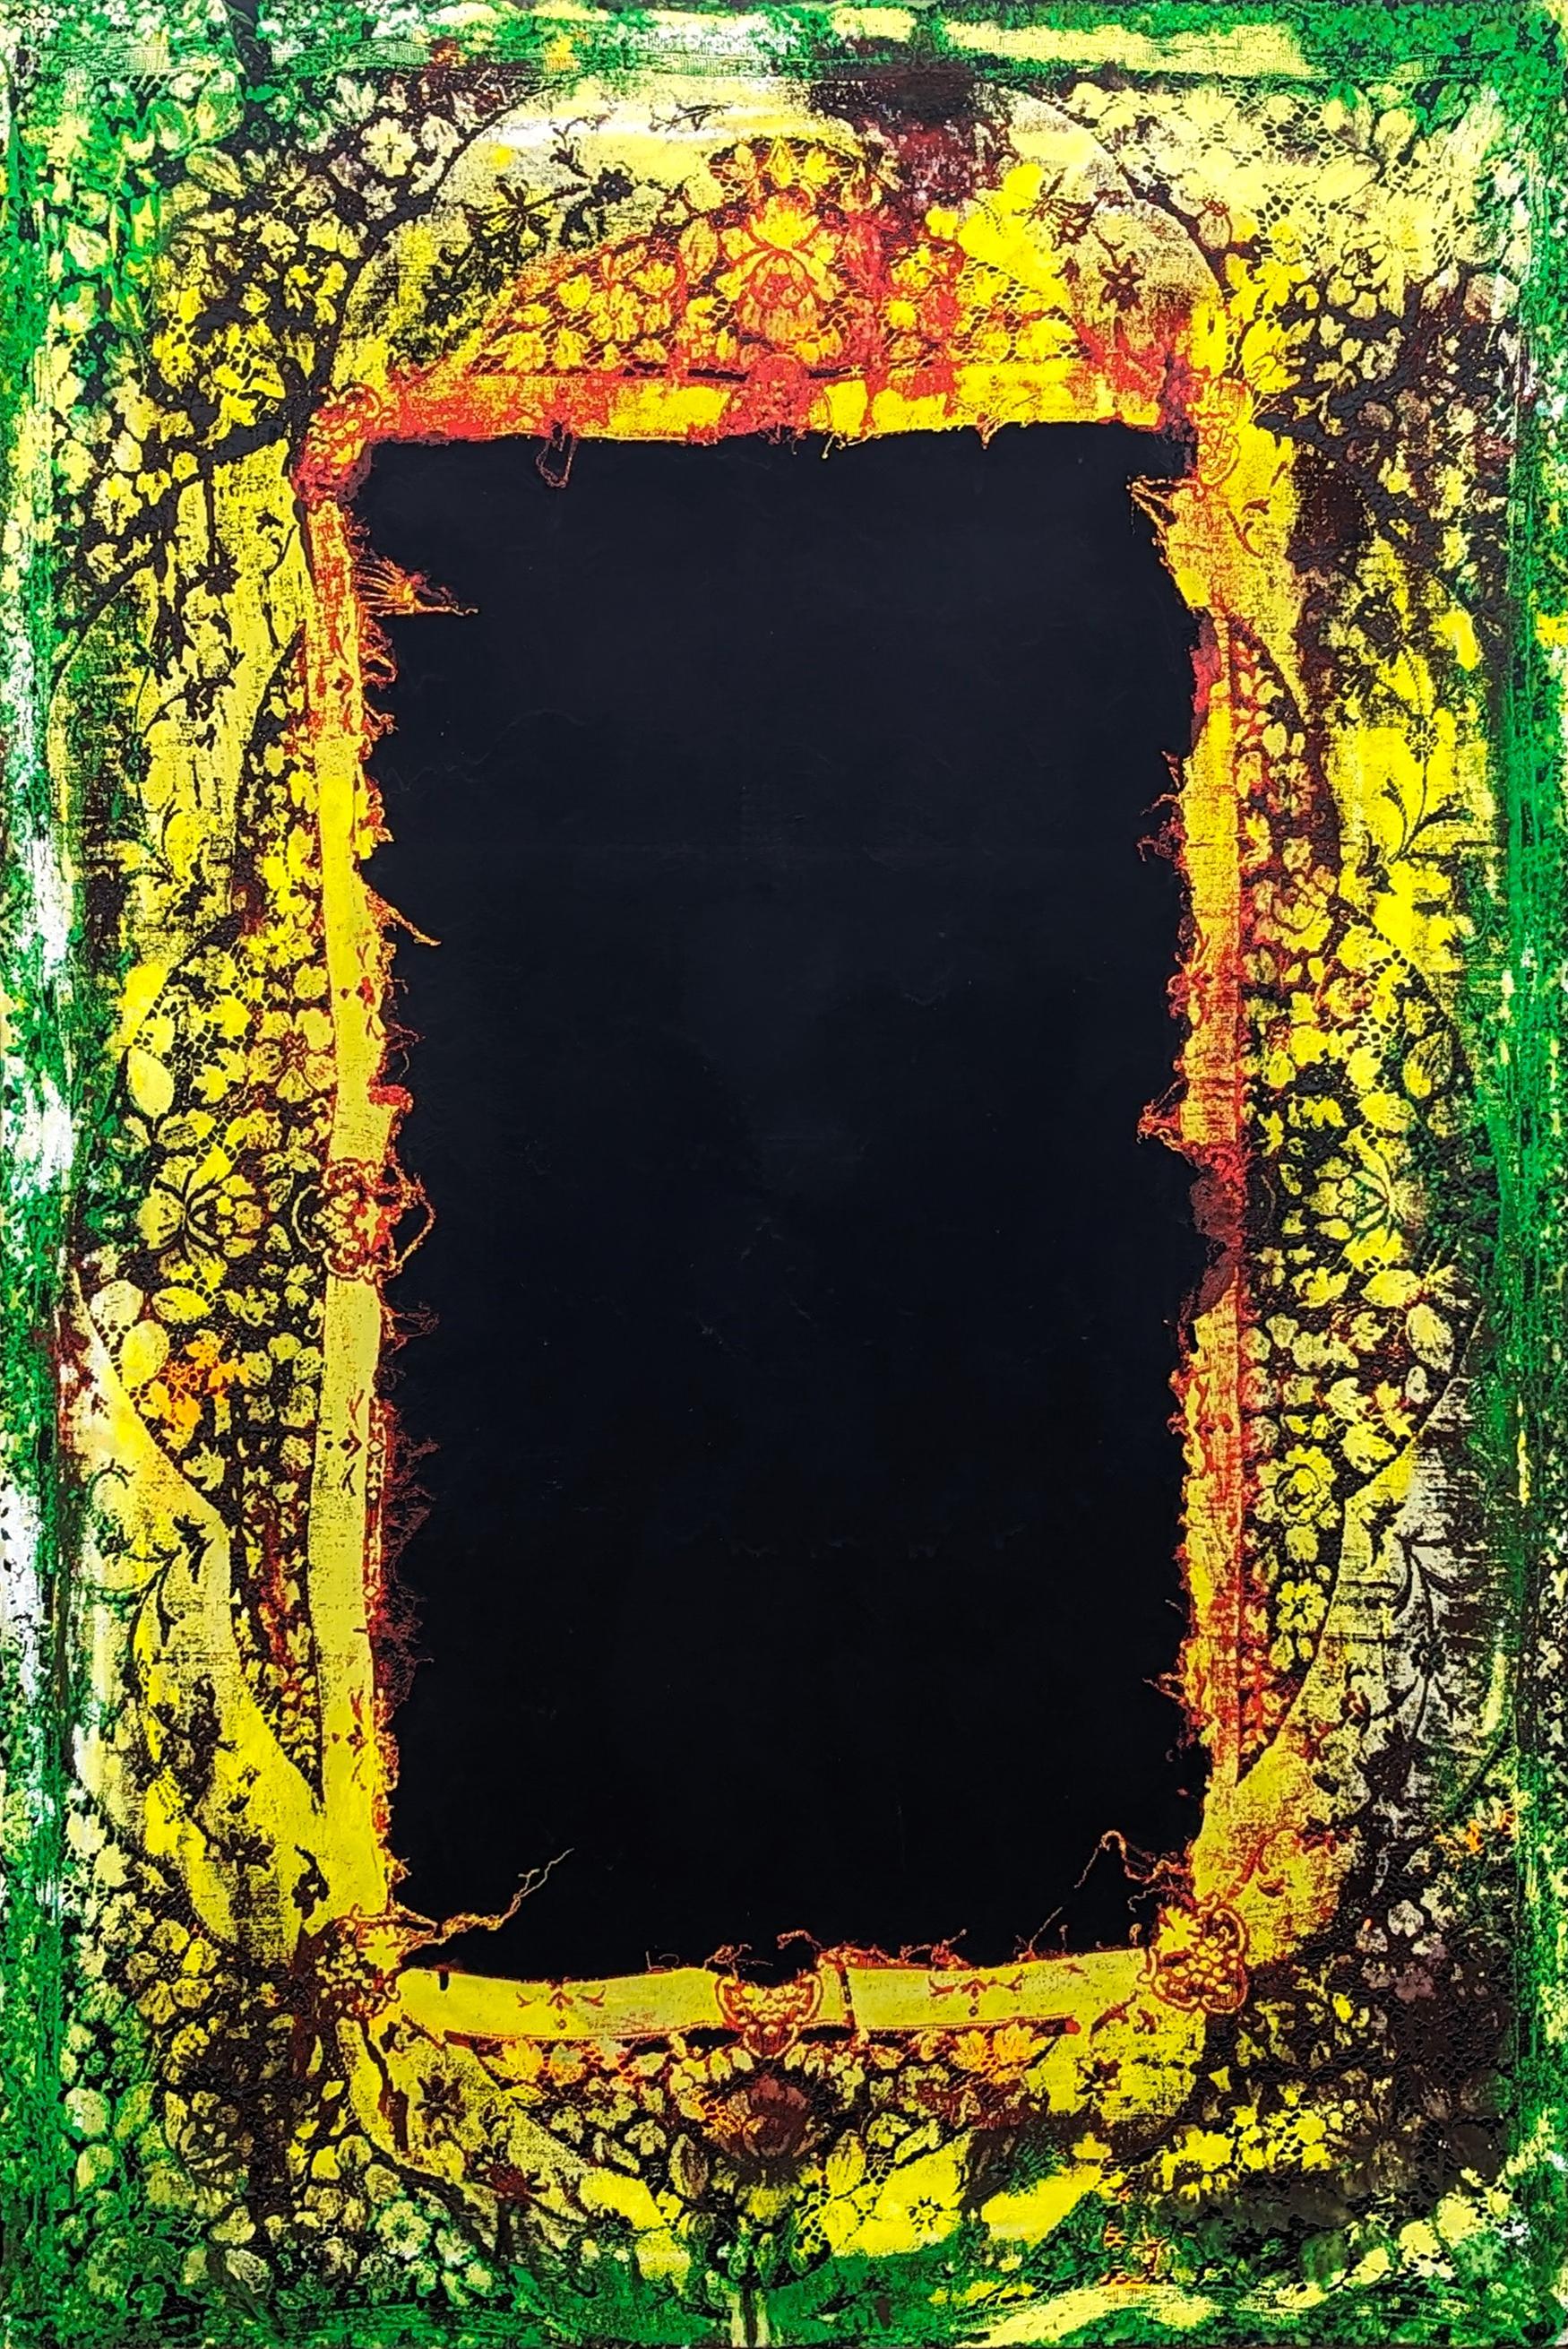 Mark Flood Abstract Painting - "The Rabbit Hole" Contemporary Abstract Green, Yellow, and Black Lace Painting